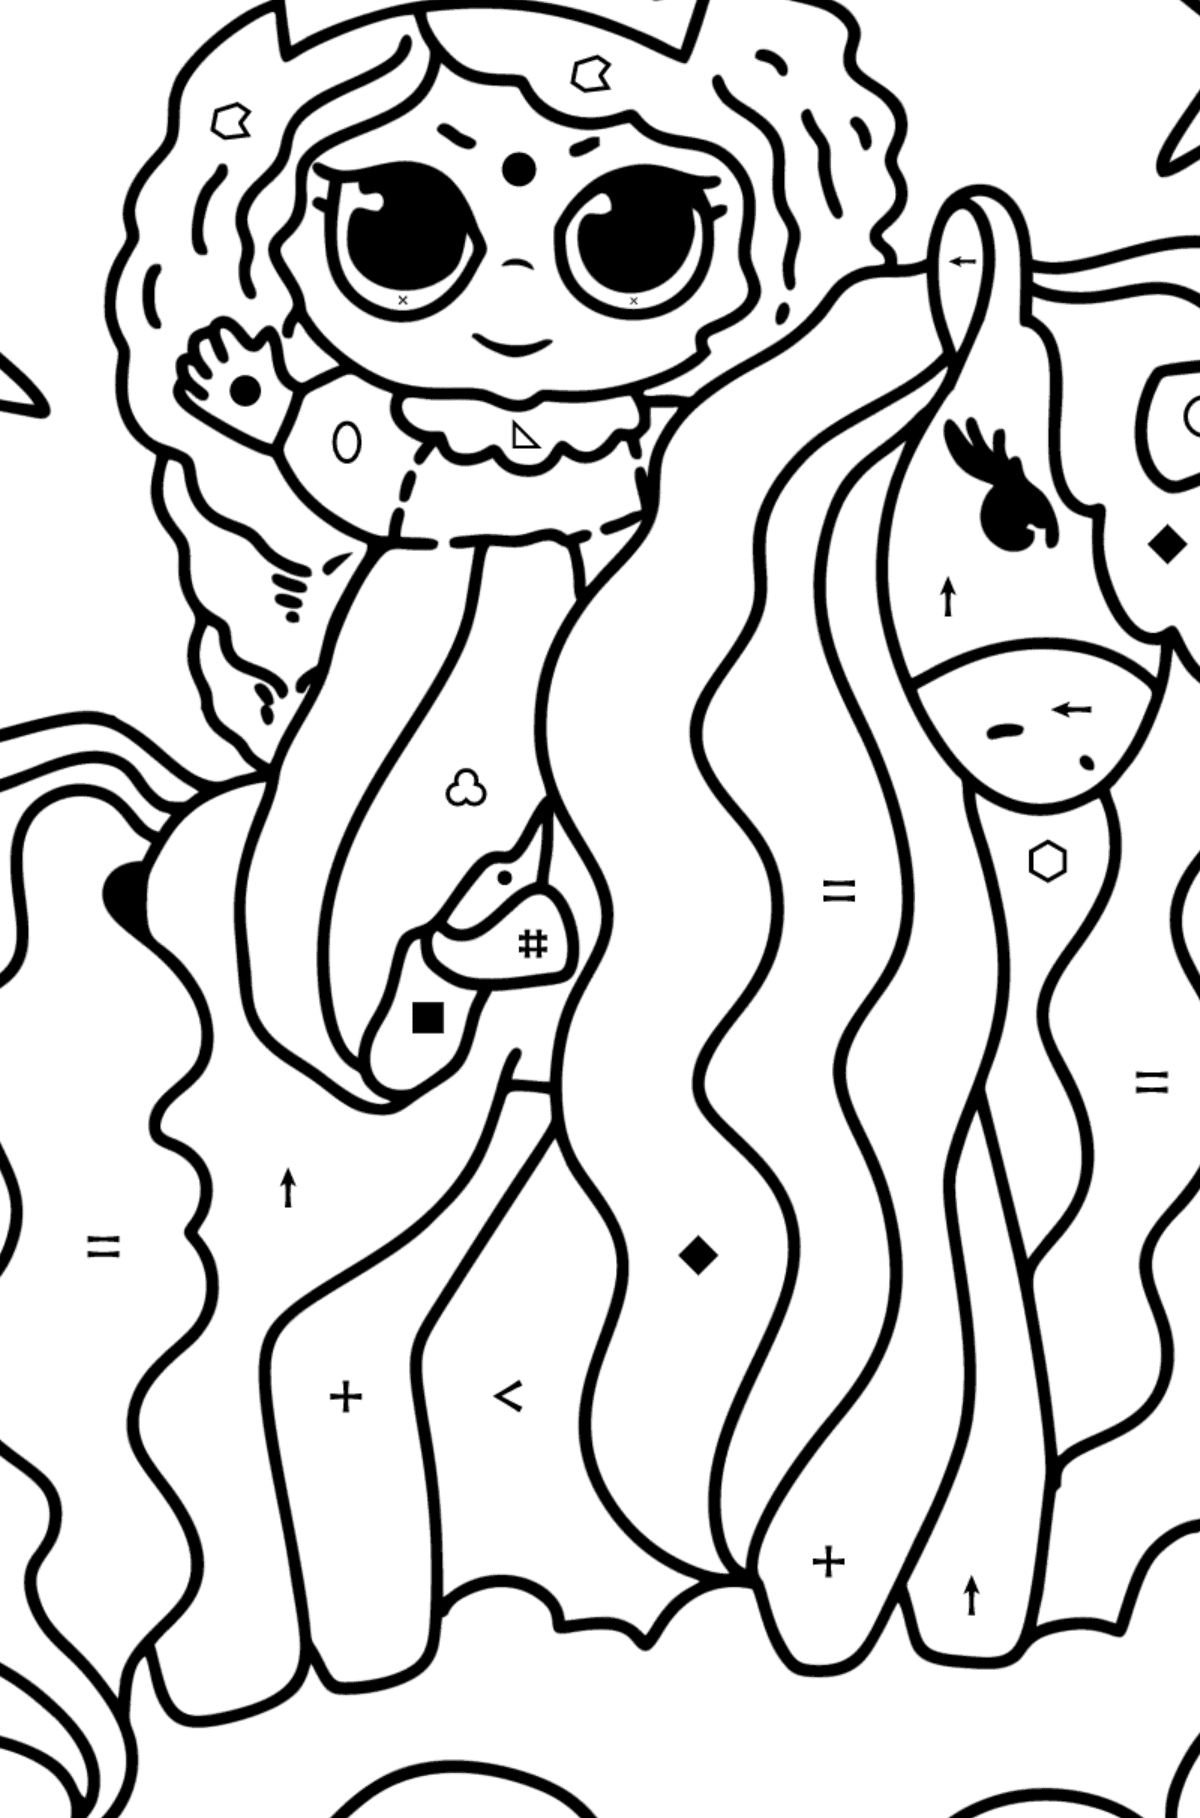 Princess and unicorn coloring page - Coloring by Symbols and Geometric Shapes for Kids